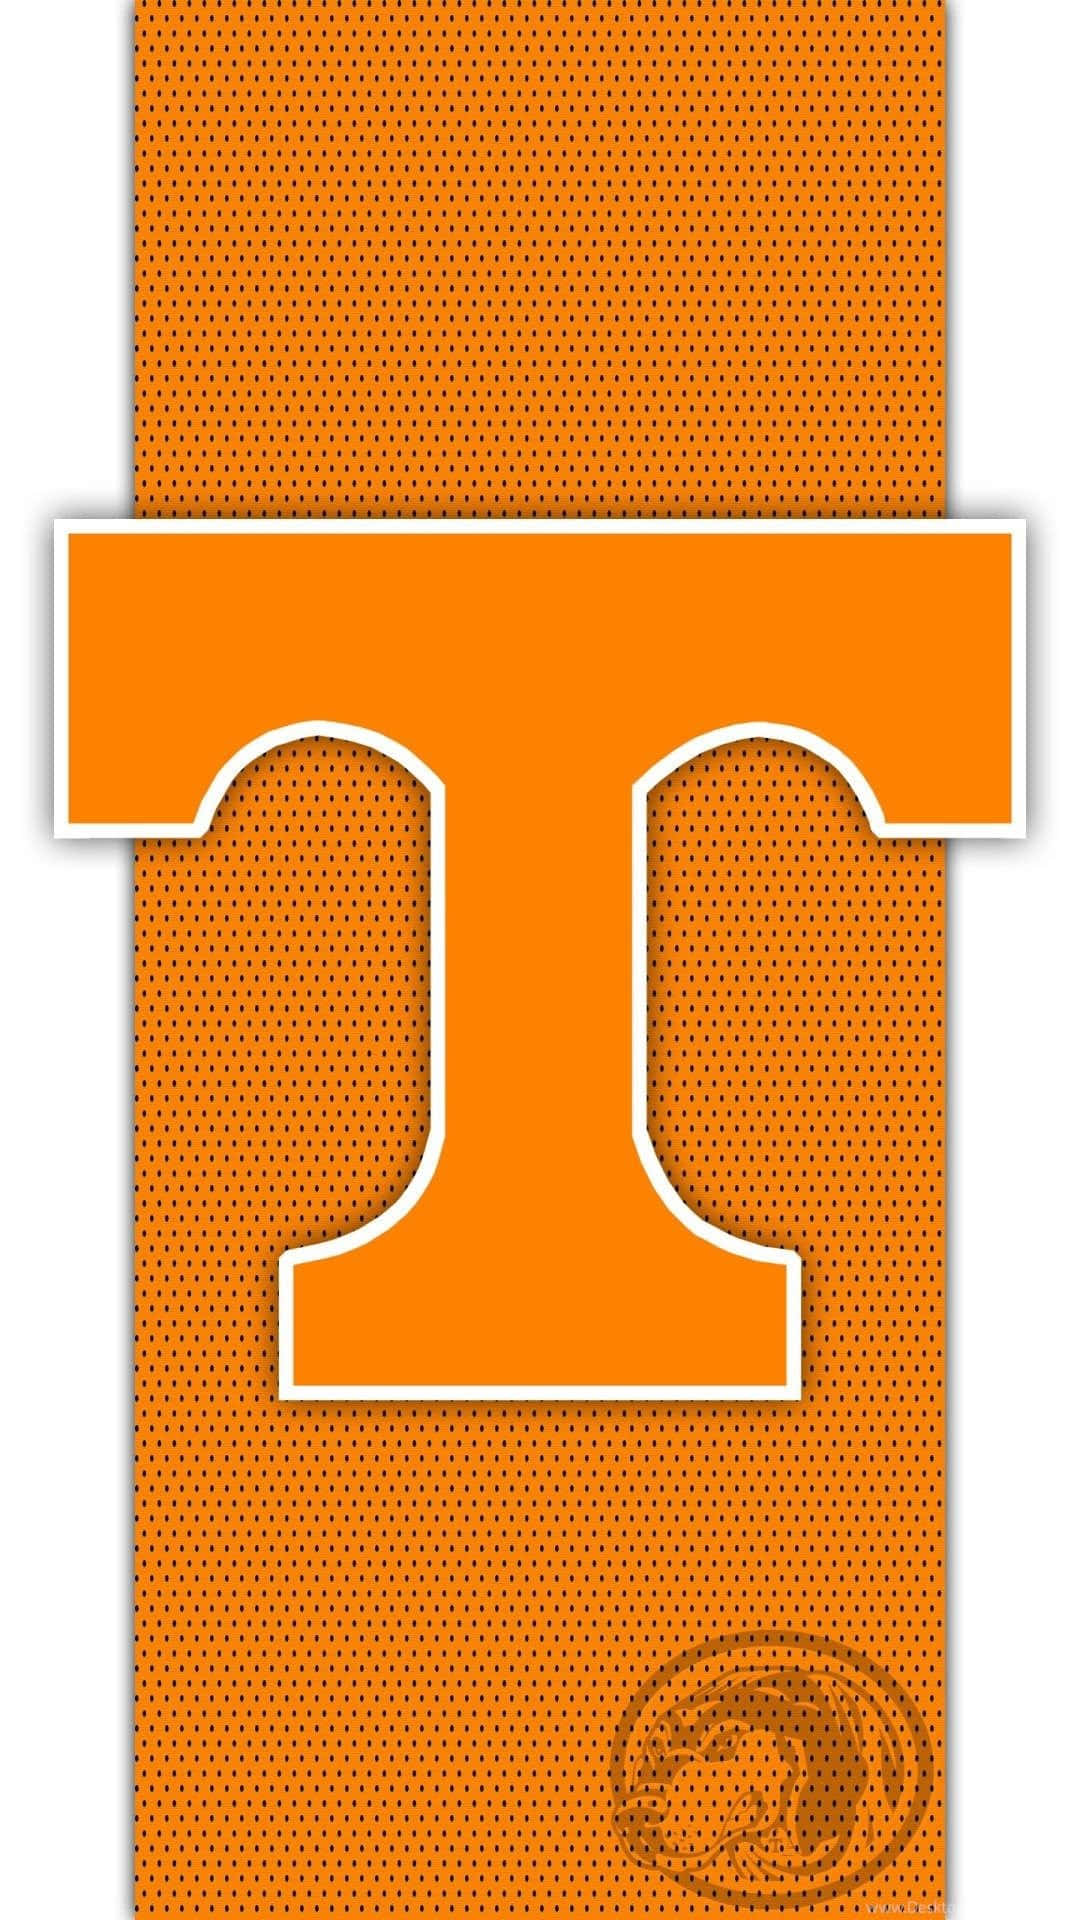 Tennessee Volunteers Logo On A White Background Wallpaper